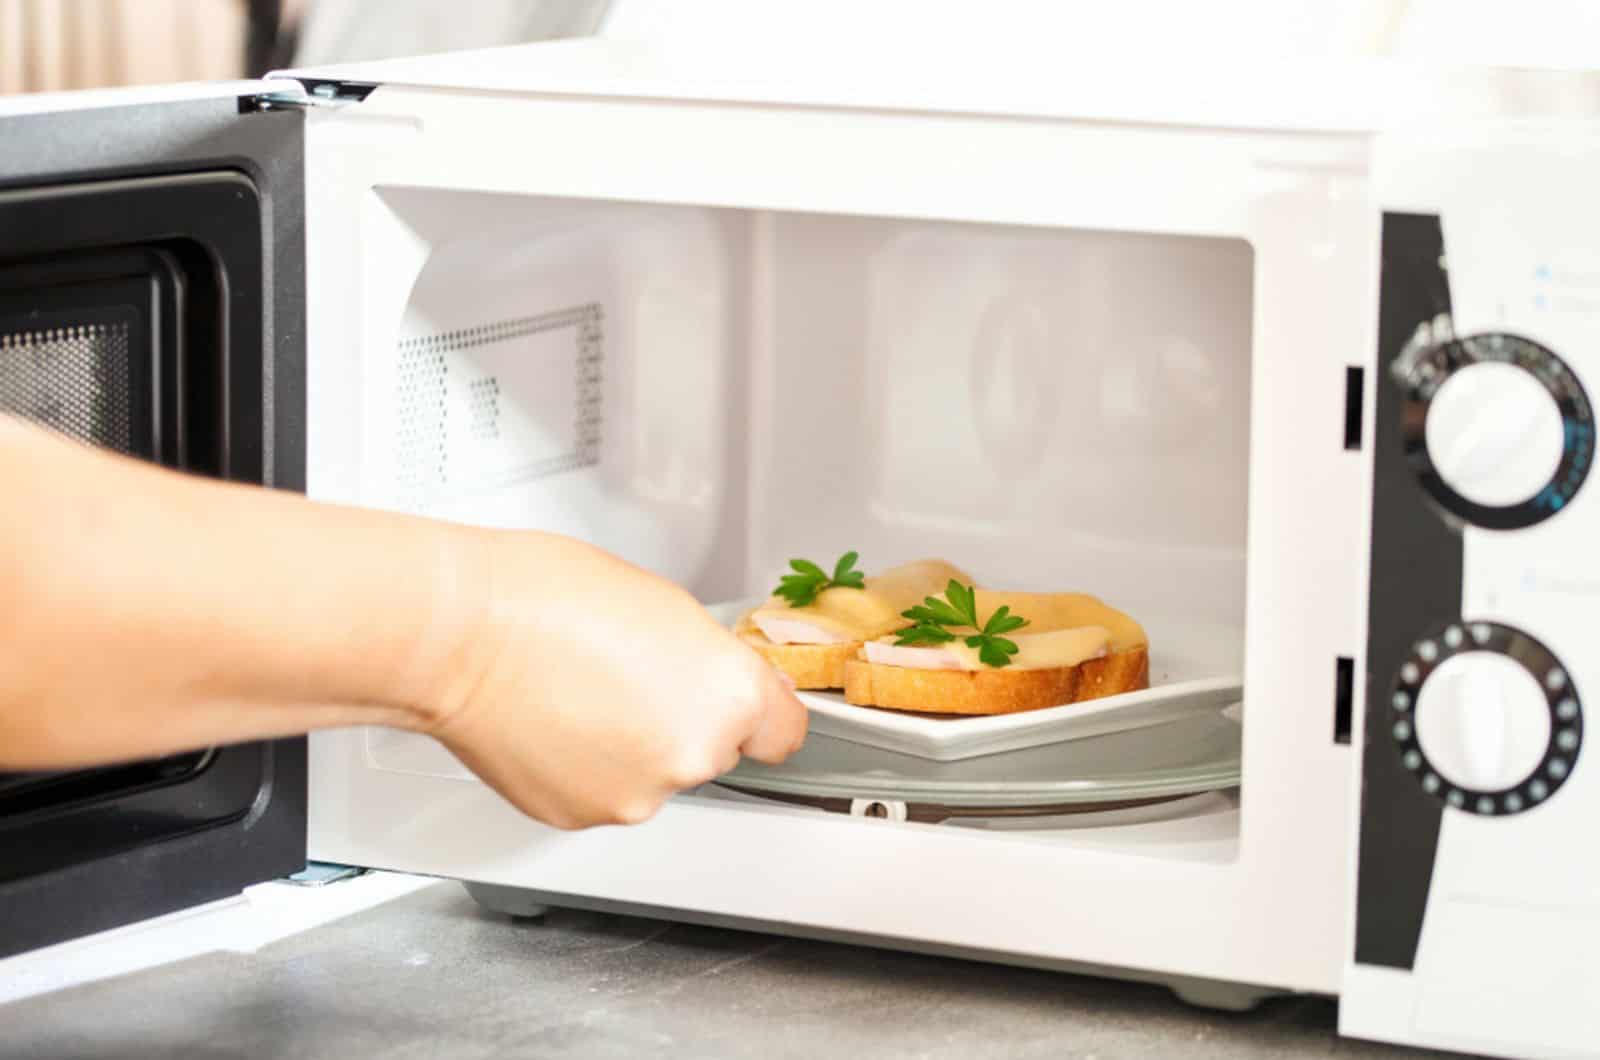 Ham cheese sandwiches in the microwave